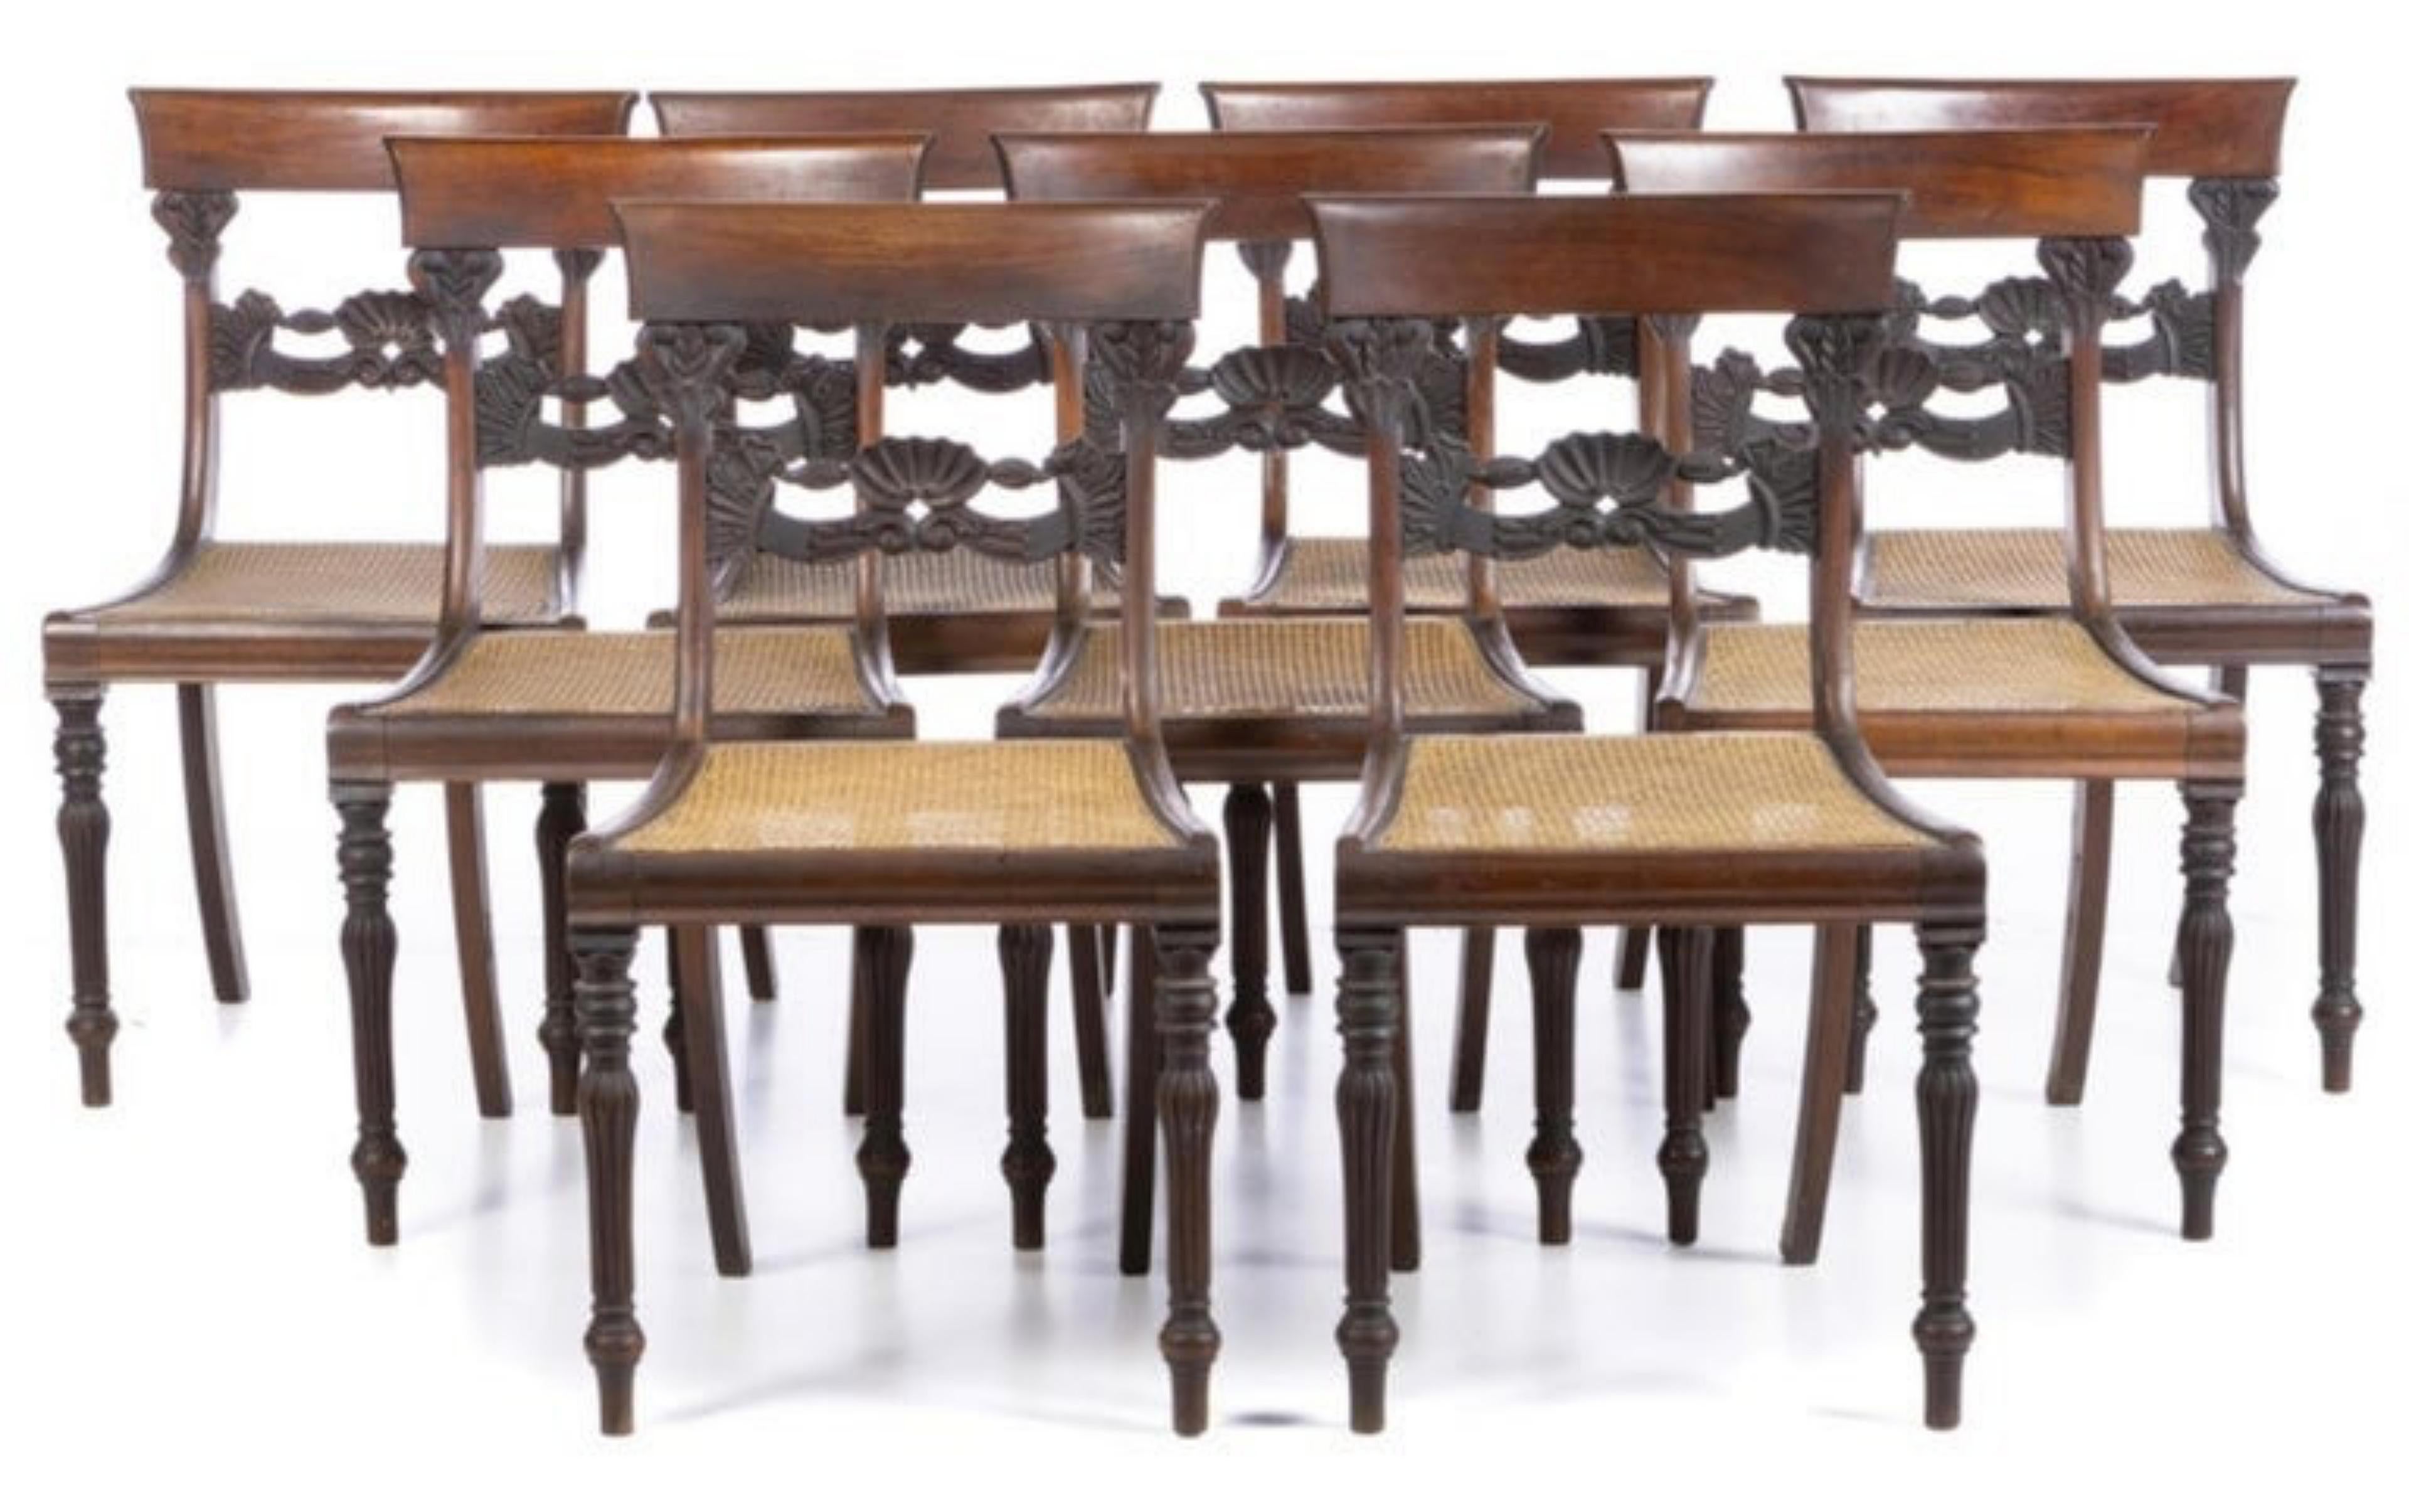 Hand-Crafted Set of 9 Portuguese Chairs, 19th Century For Sale